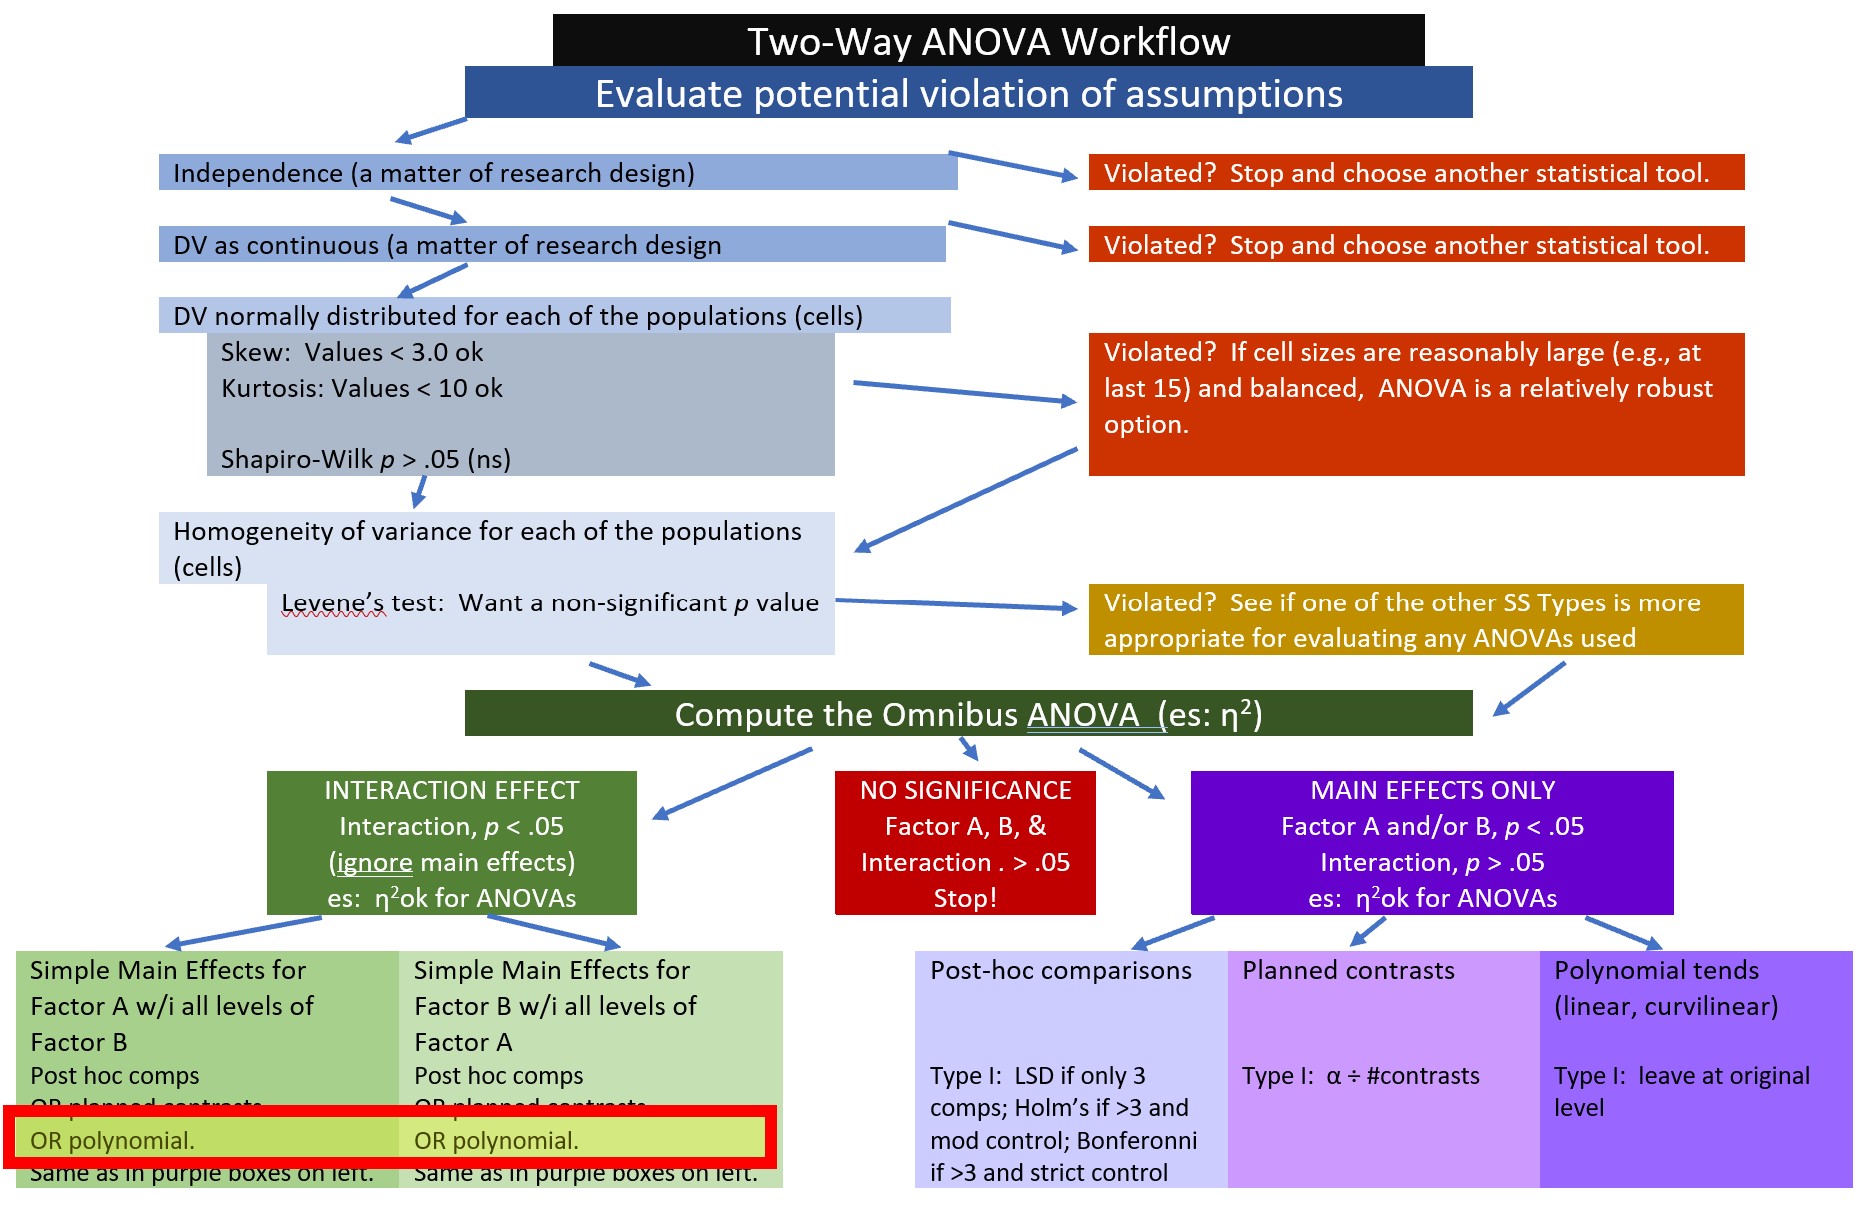 Image our place in the Two-Way ANOVA Workflow.